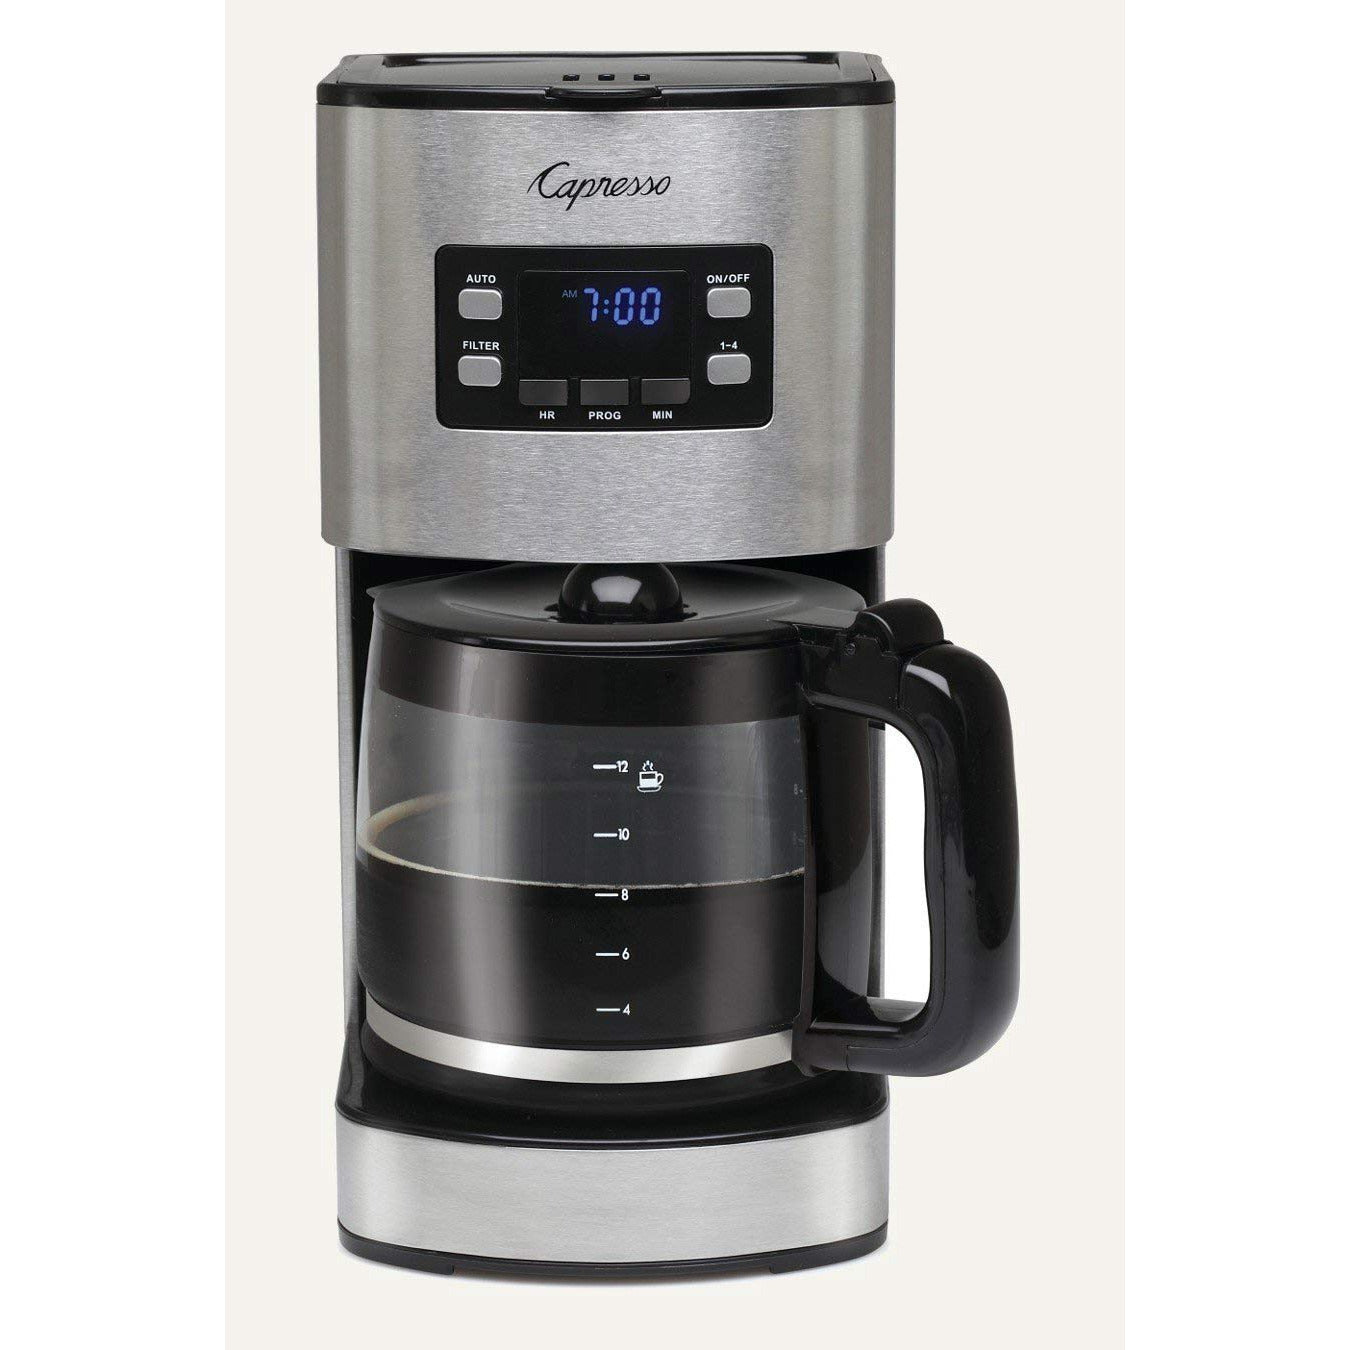 Capresso SG300 12-Cup Stainless Steel Coffee Maker (1439998443562)